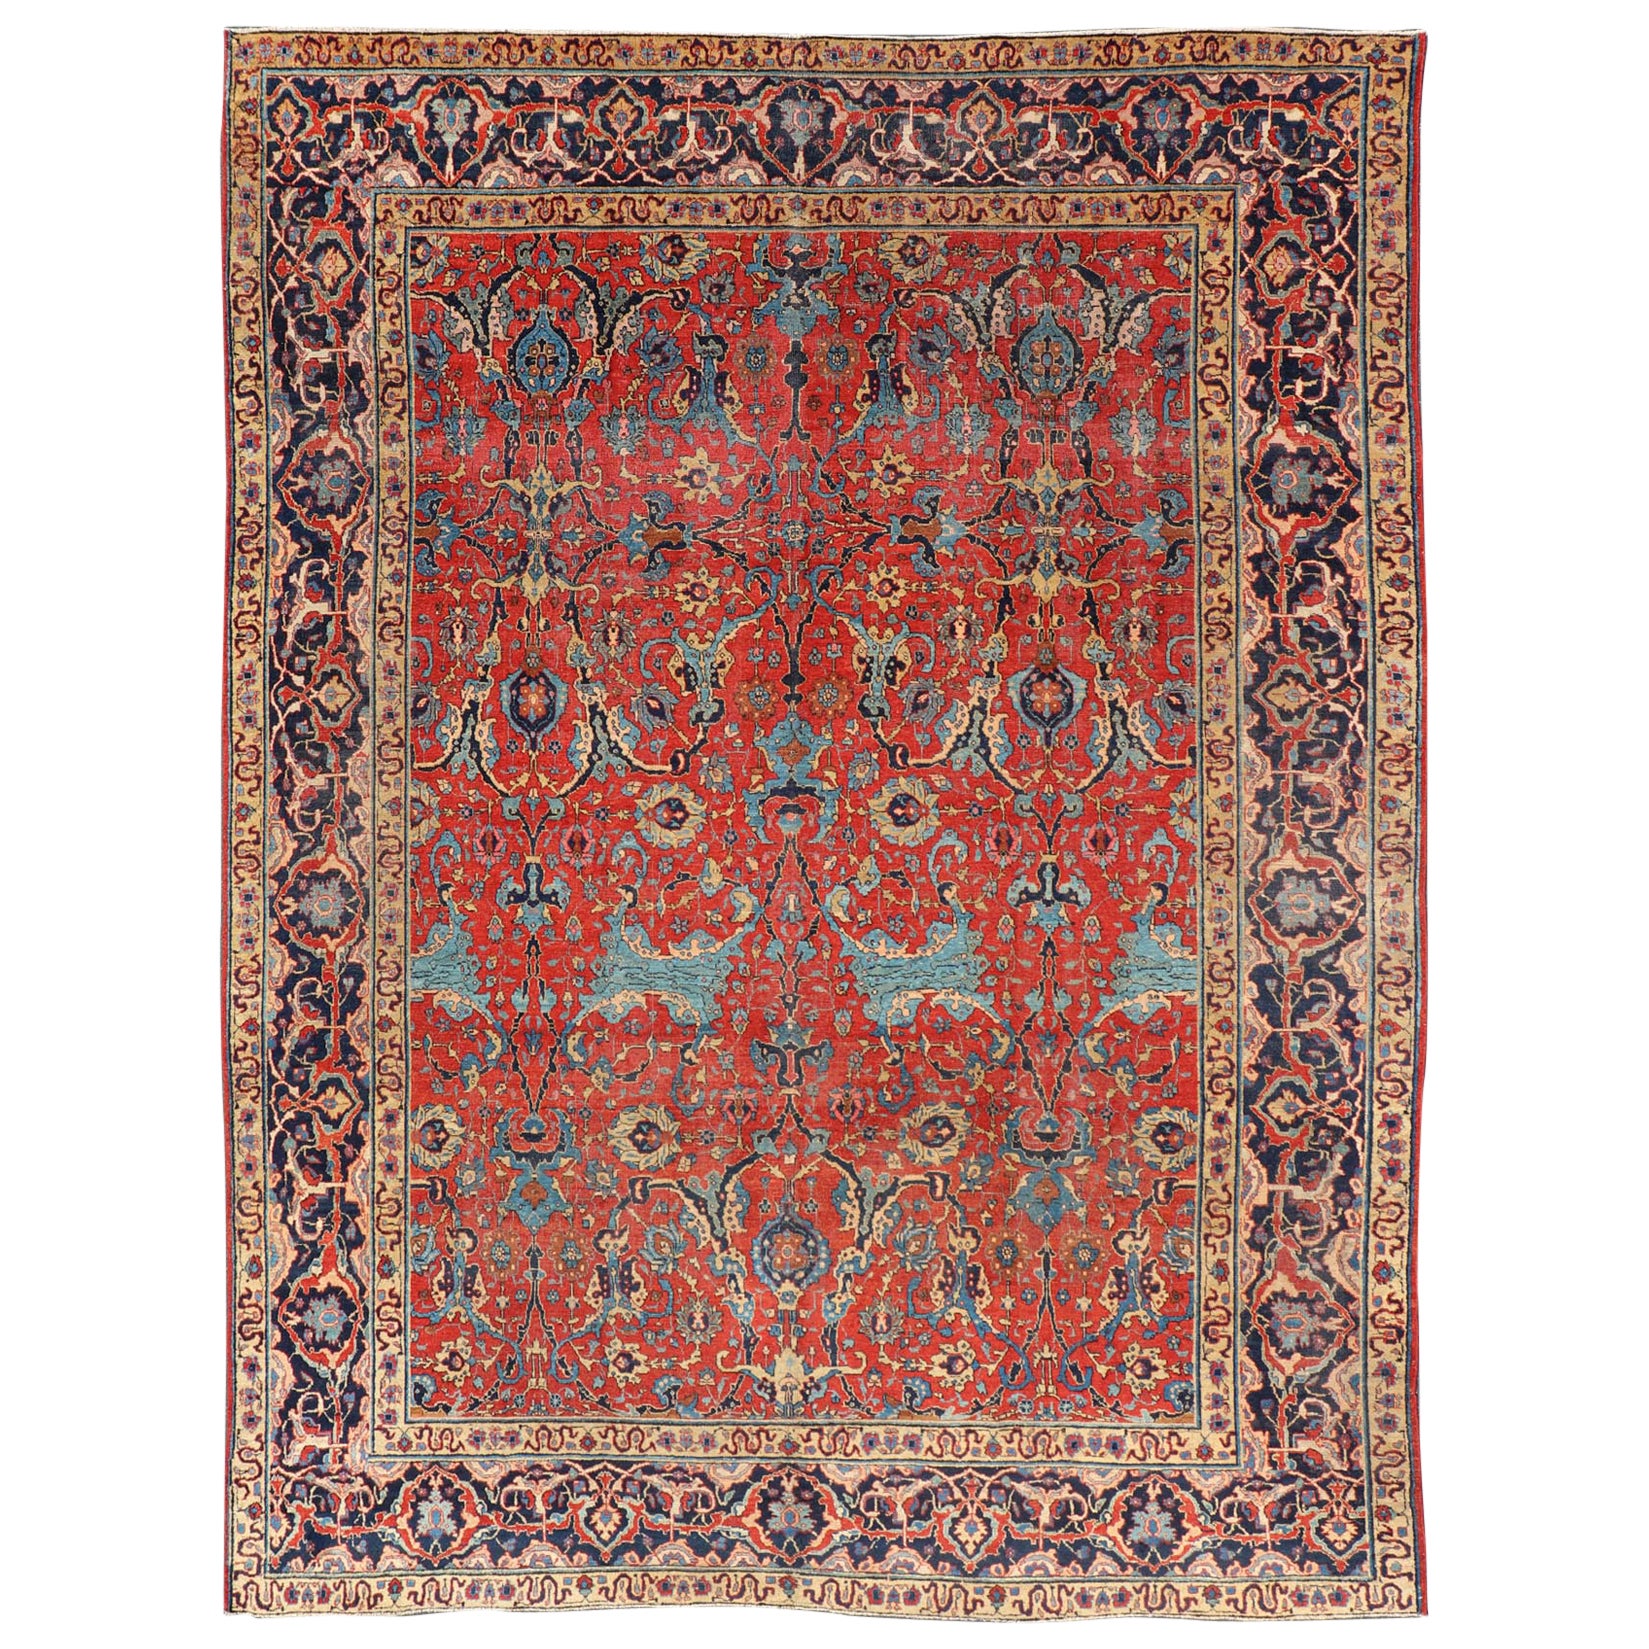 Antique Tabriz Rug with All Over Design in Rust Red, Blue's, Yellow, and L. Blue For Sale